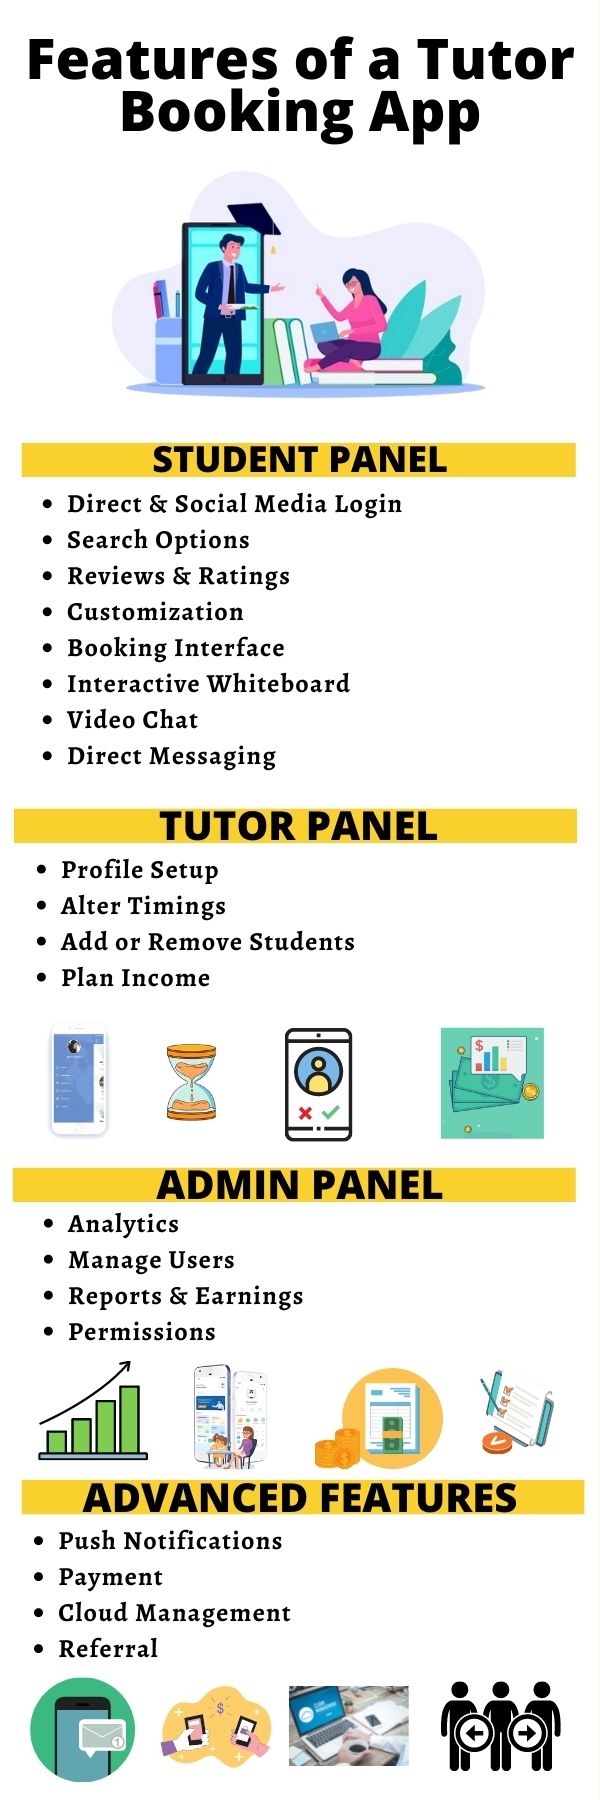 Features of a Tutor Booking App